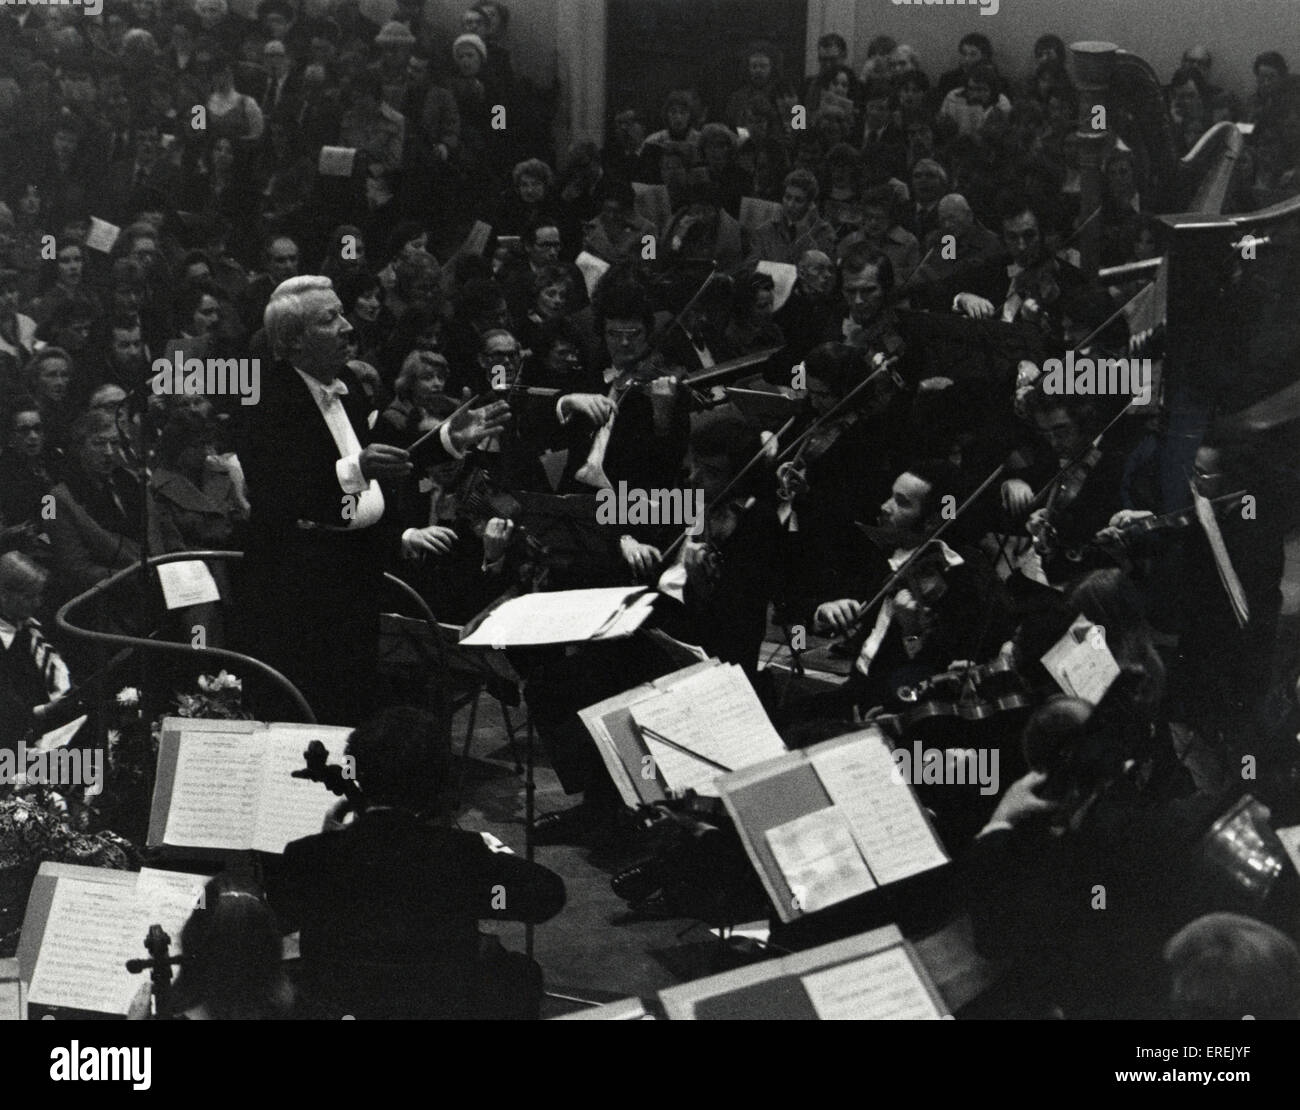 Edward Heath conducting orchestra with baton in 1977. English Prime Minister in Tory government Stock Photo